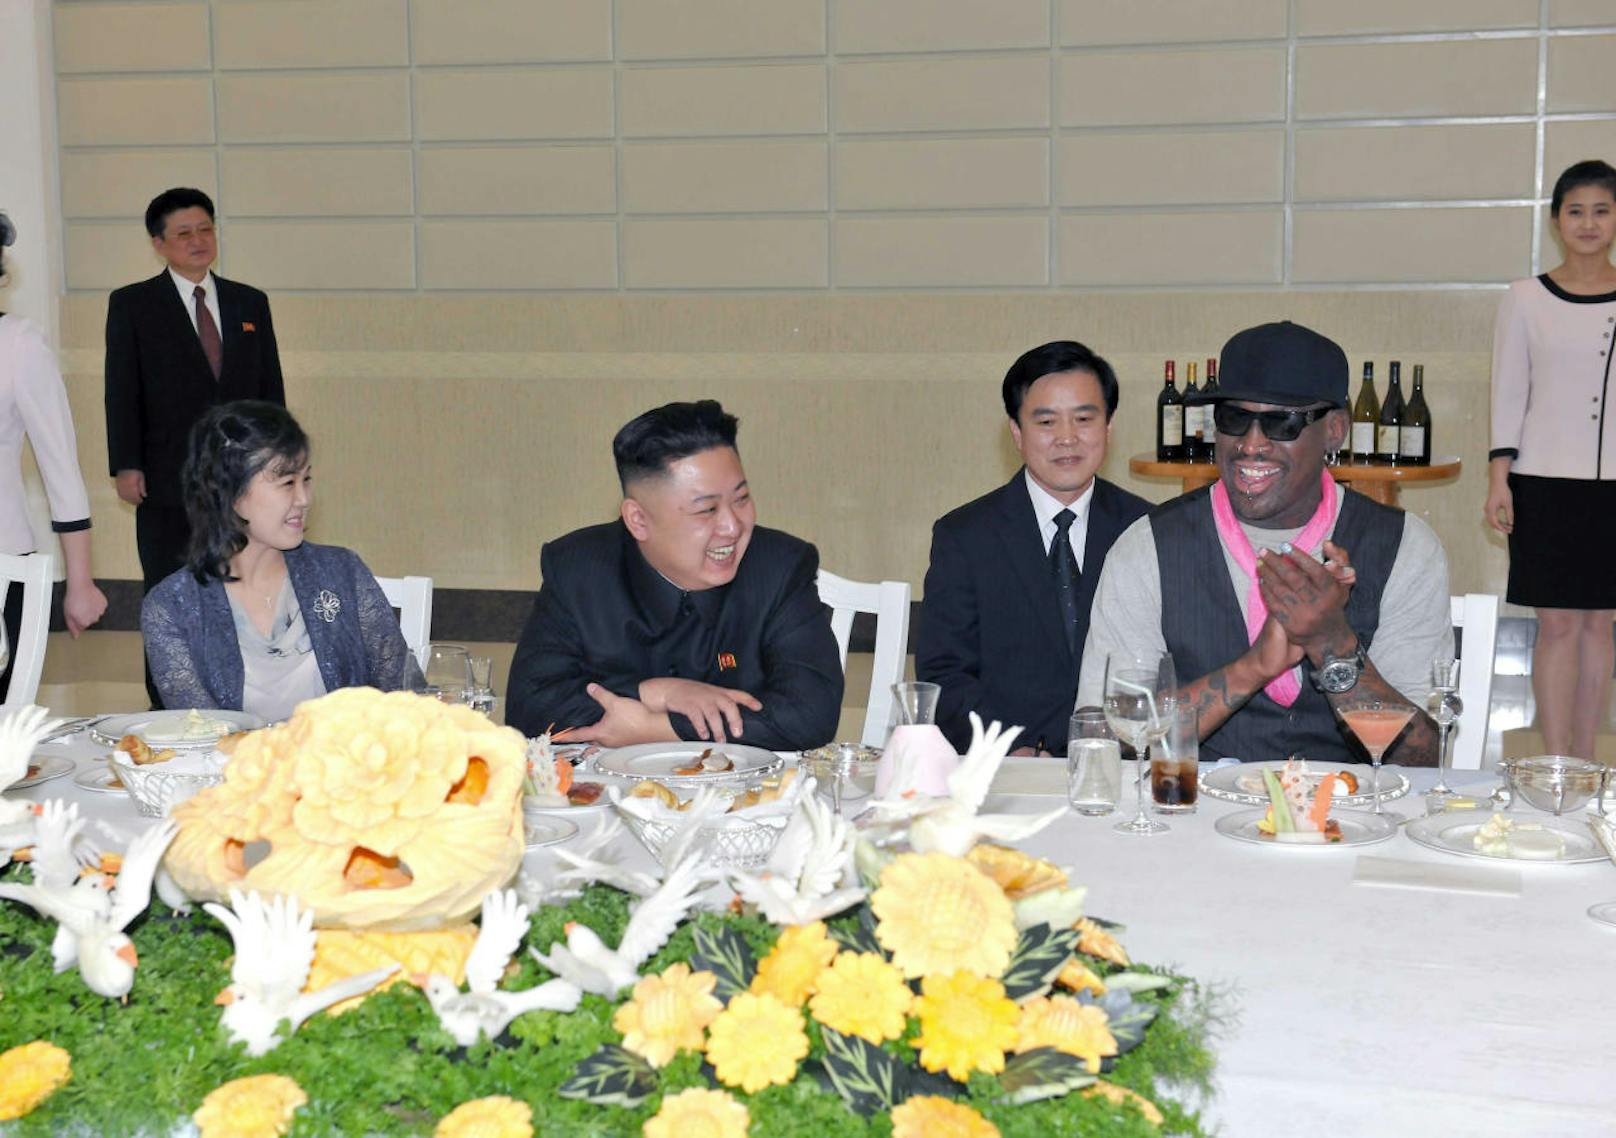 North Korean leader Kim Jong-Un (C), his wife Ri Sol-Ju (L) and former NBA basketball player Dennis Rodman (R) talk in Pyongyang in this undated picture released by North Korea's KCNA news agency on March 1, 2013. KCNA reported that a mixed basketball game of visiting U.S. basketball players and North Korean players was held at Ryugyong Jong Ju Yong Gymnasium in Pyongyang on February 28, 2013.     REUTERS/KCNA (NORTH KOREA - Tags: POLITICS SPORT TPX IMAGES OF THE DAY BASKETBALL) ATTENTION EDITORS - THIS PICTURE WAS PROVIDED BY A THIRD PARTY. REUTERS IS UNABLE TO INDEPENDENTLY VERIFY THE AUTHENTICITY, CONTENT, LOCATION OR DATE OF THIS IMAGE. THIS PICTURE IS DISTRIBUTED EXACTLY AS RECEIVED BY REUTERS, AS A SERVICE TO CLIENTS. QUALITY FROM SOURCE. NO THIRD PARTY SALES. NOT FOR USE BY REUTERS THIRD PARTY DISTRIBUTORS - RTR3EF7R